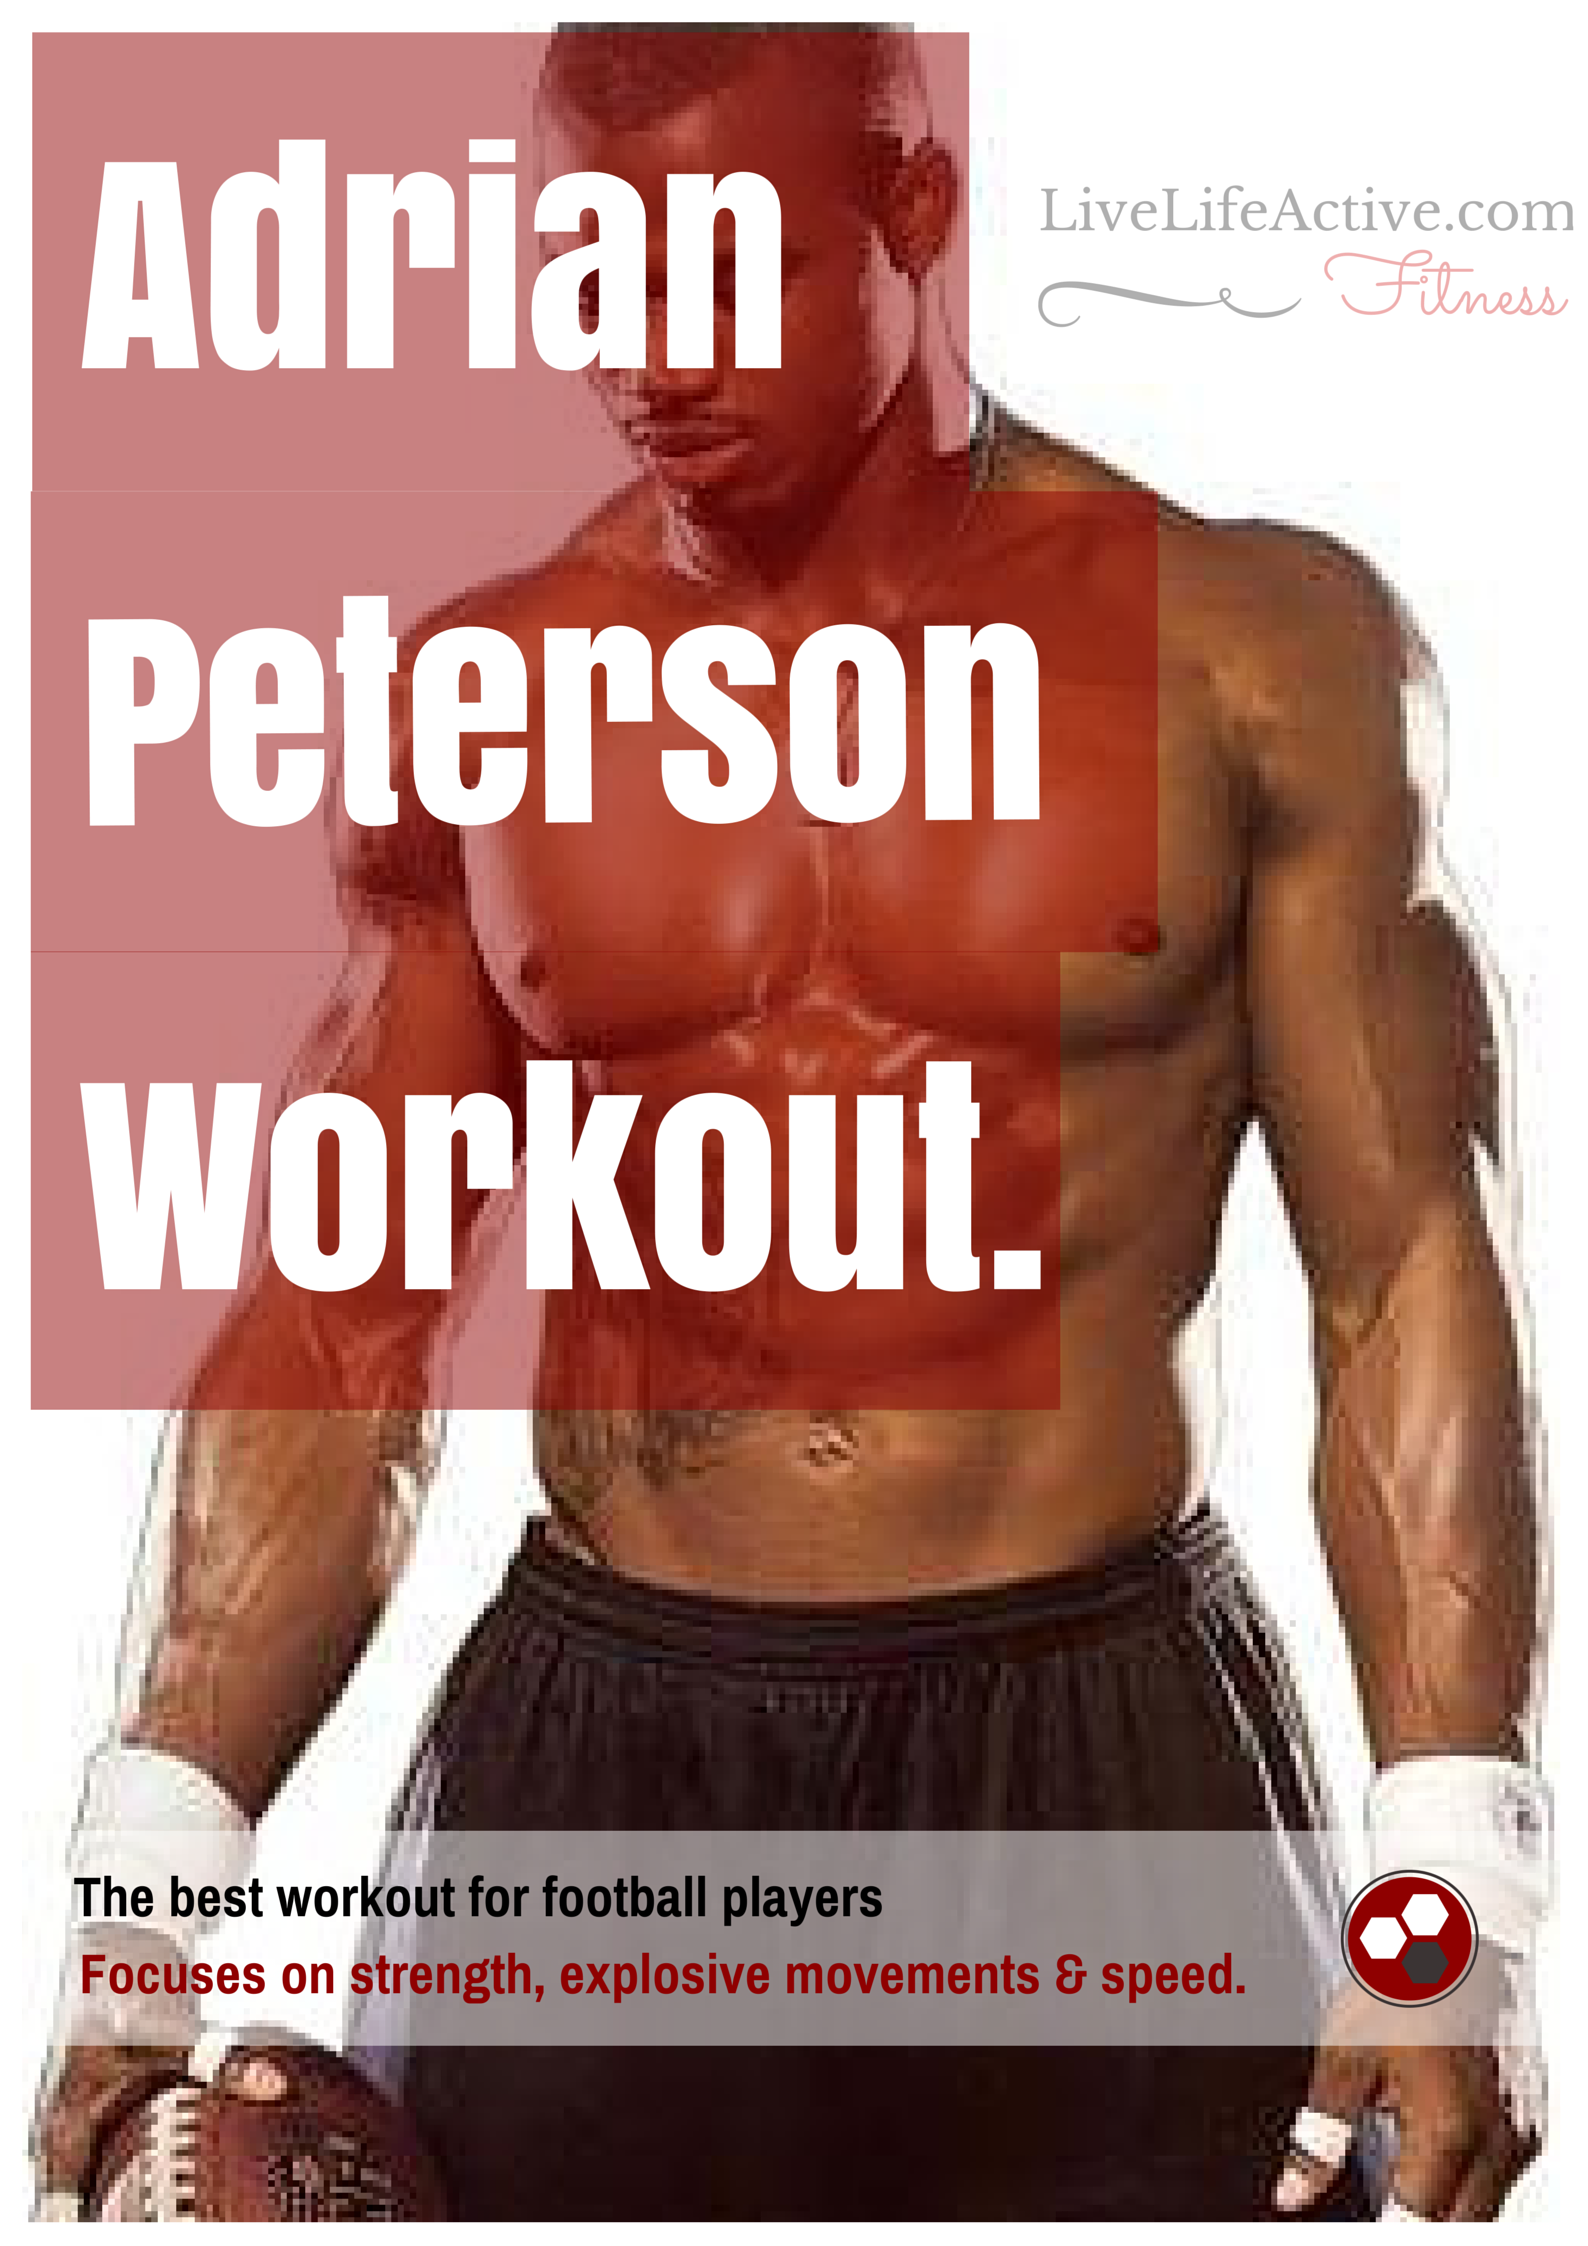 Adrian Peterson Workout Football Workout Live Life Active